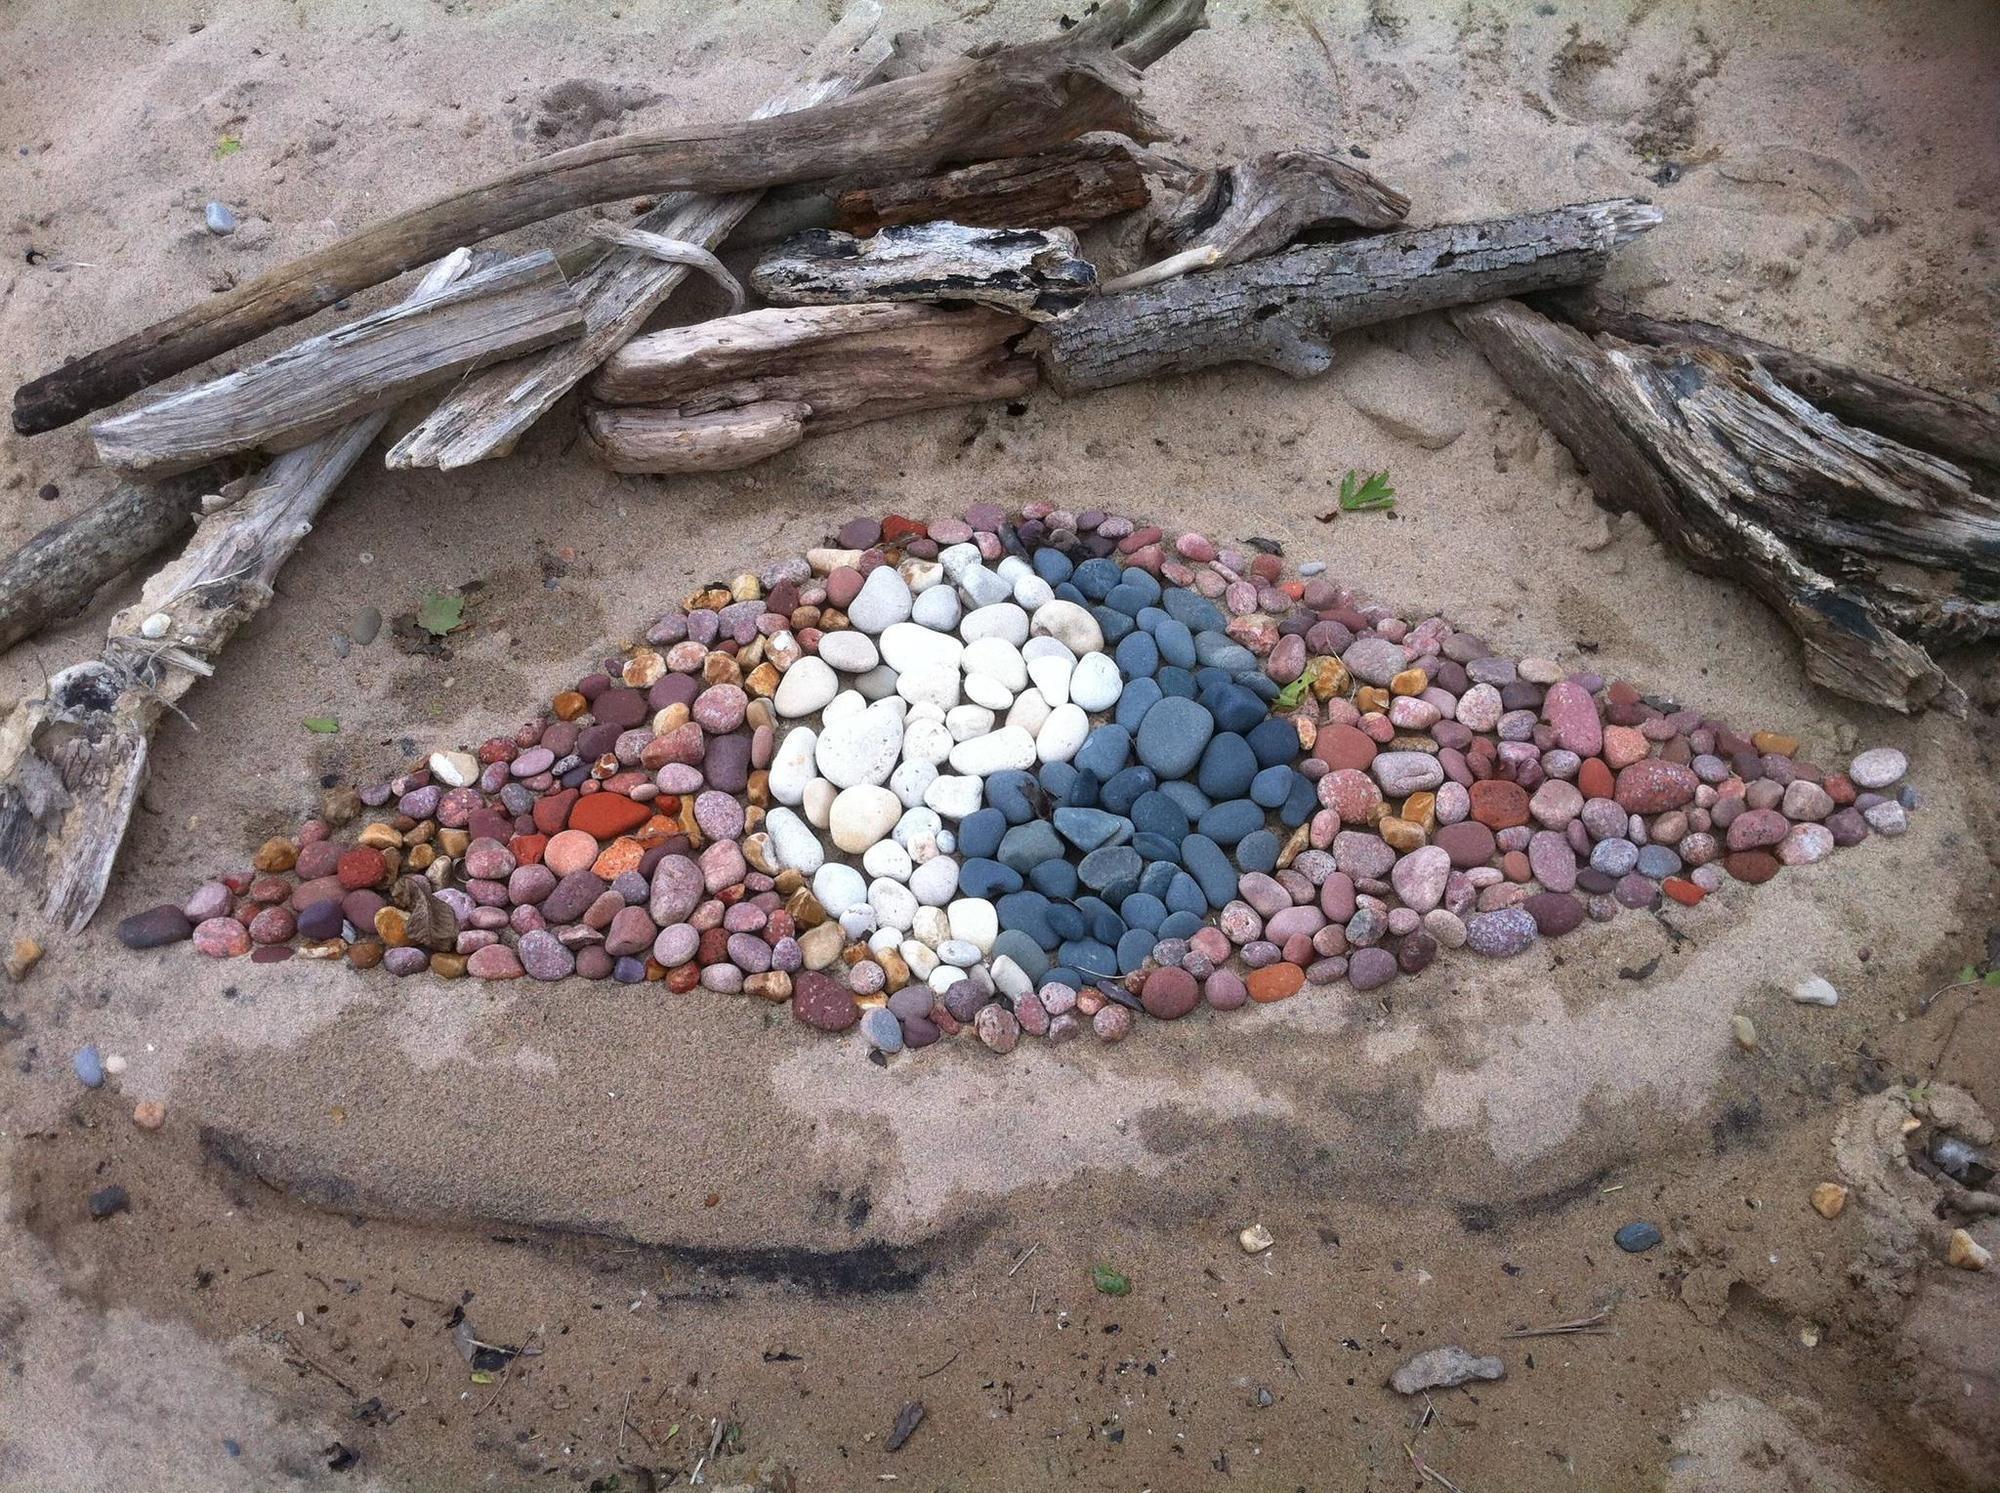 A lucky person stumbled upon this rock design on the beach.